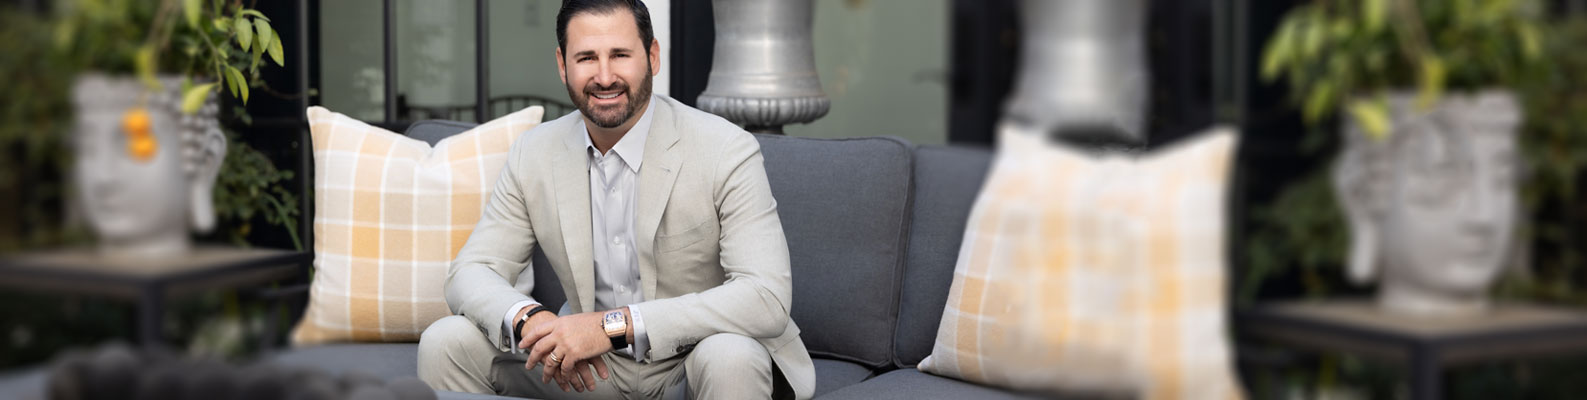 Dave Cantin, business finance speaking professional, wearing a tan suit posing for a photo on a gray couch with yellow plaid pillows and two planters on the side.